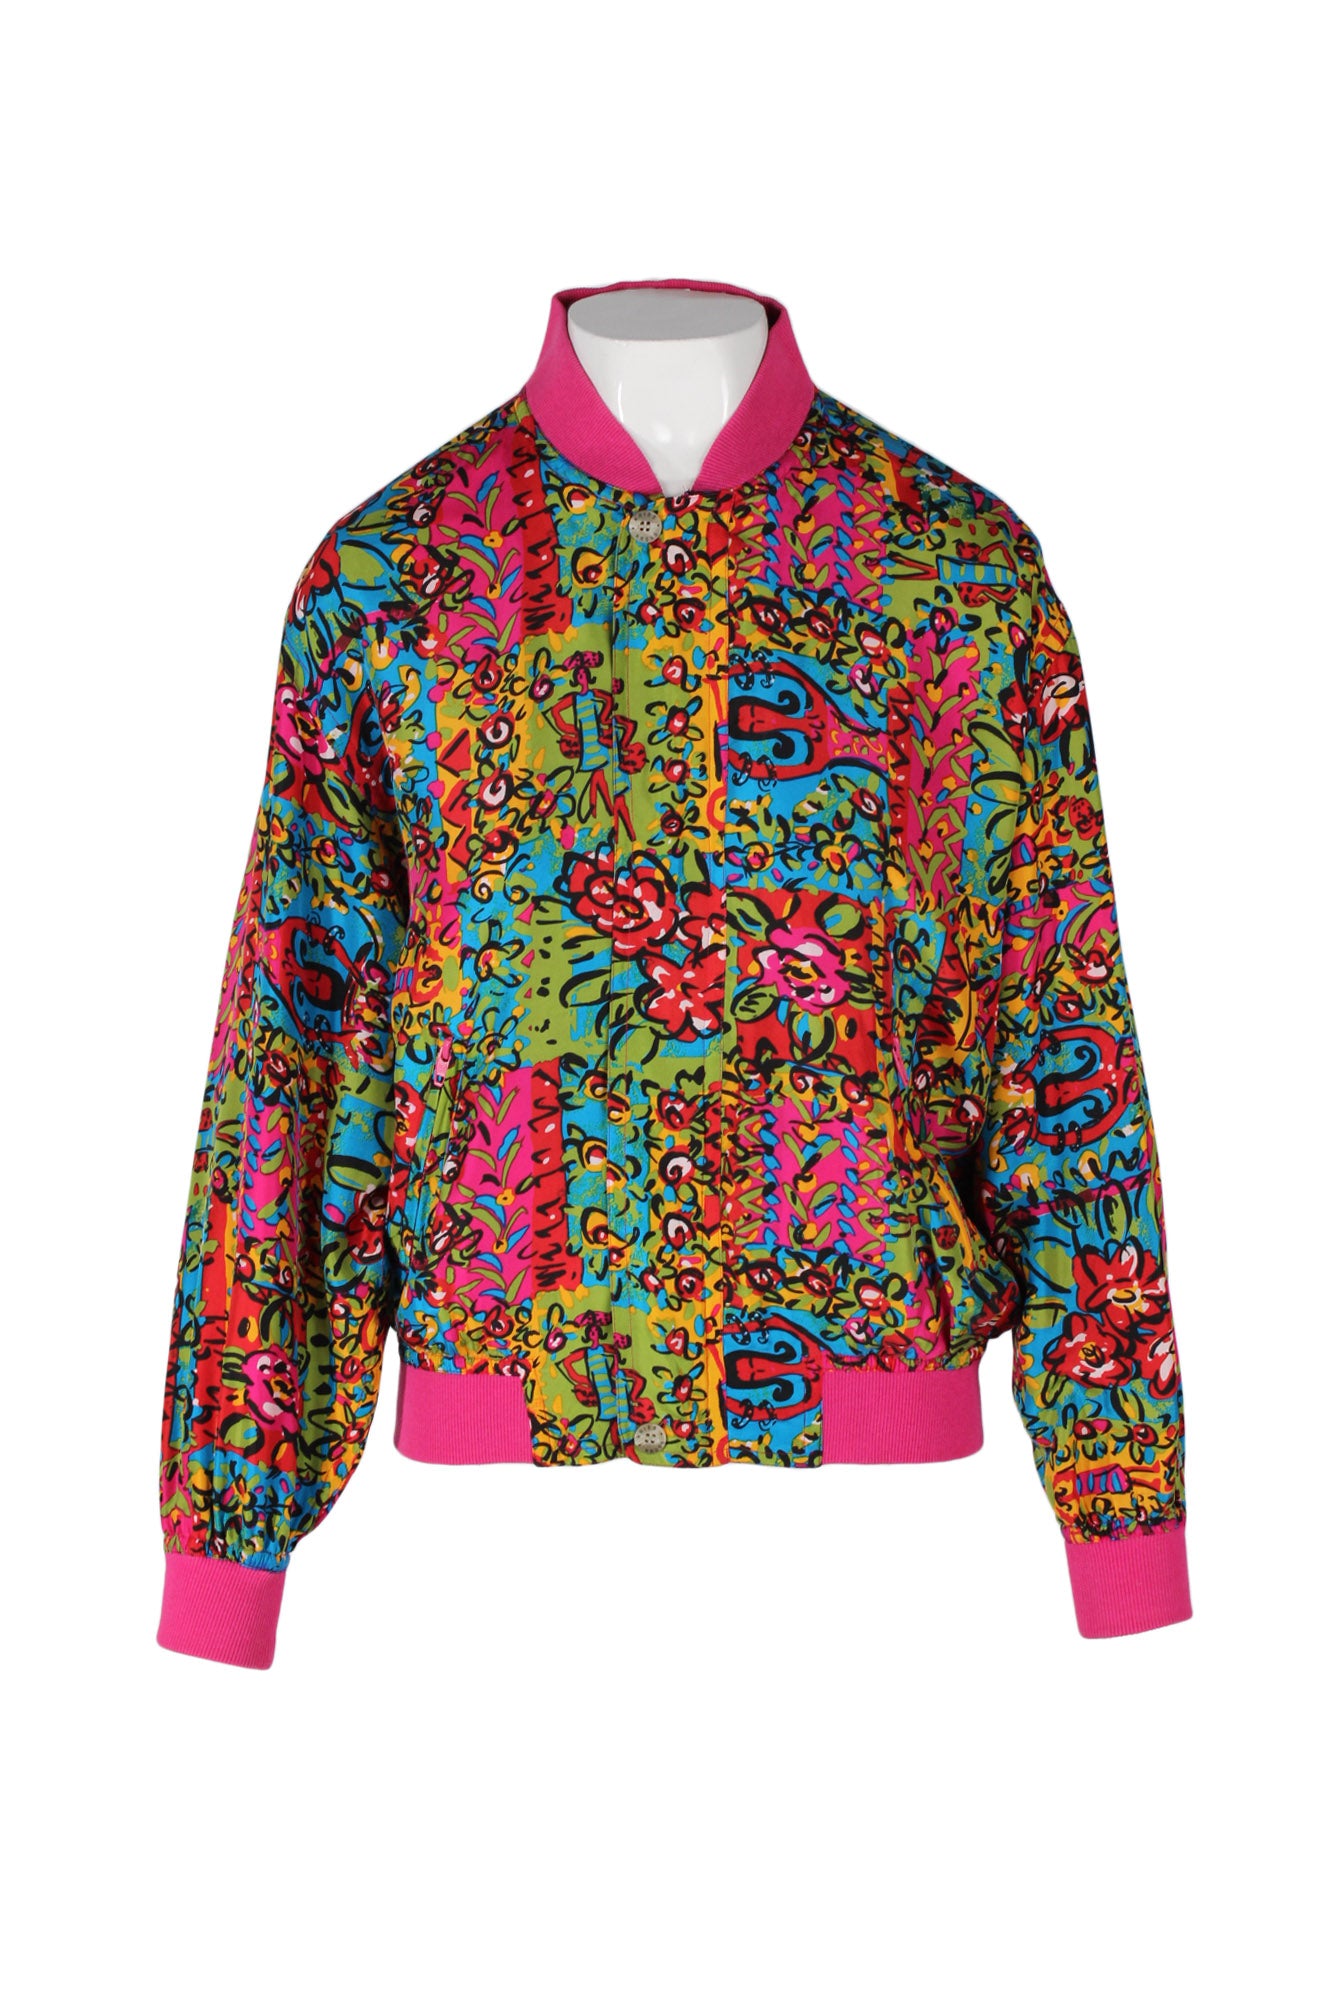 vintage kriss kross bright pink/multicolored silk bomber jacket. features pink ribbed hem/cuffs/collar, zip closure up center, side zippered pockets, and all over abstract print. 